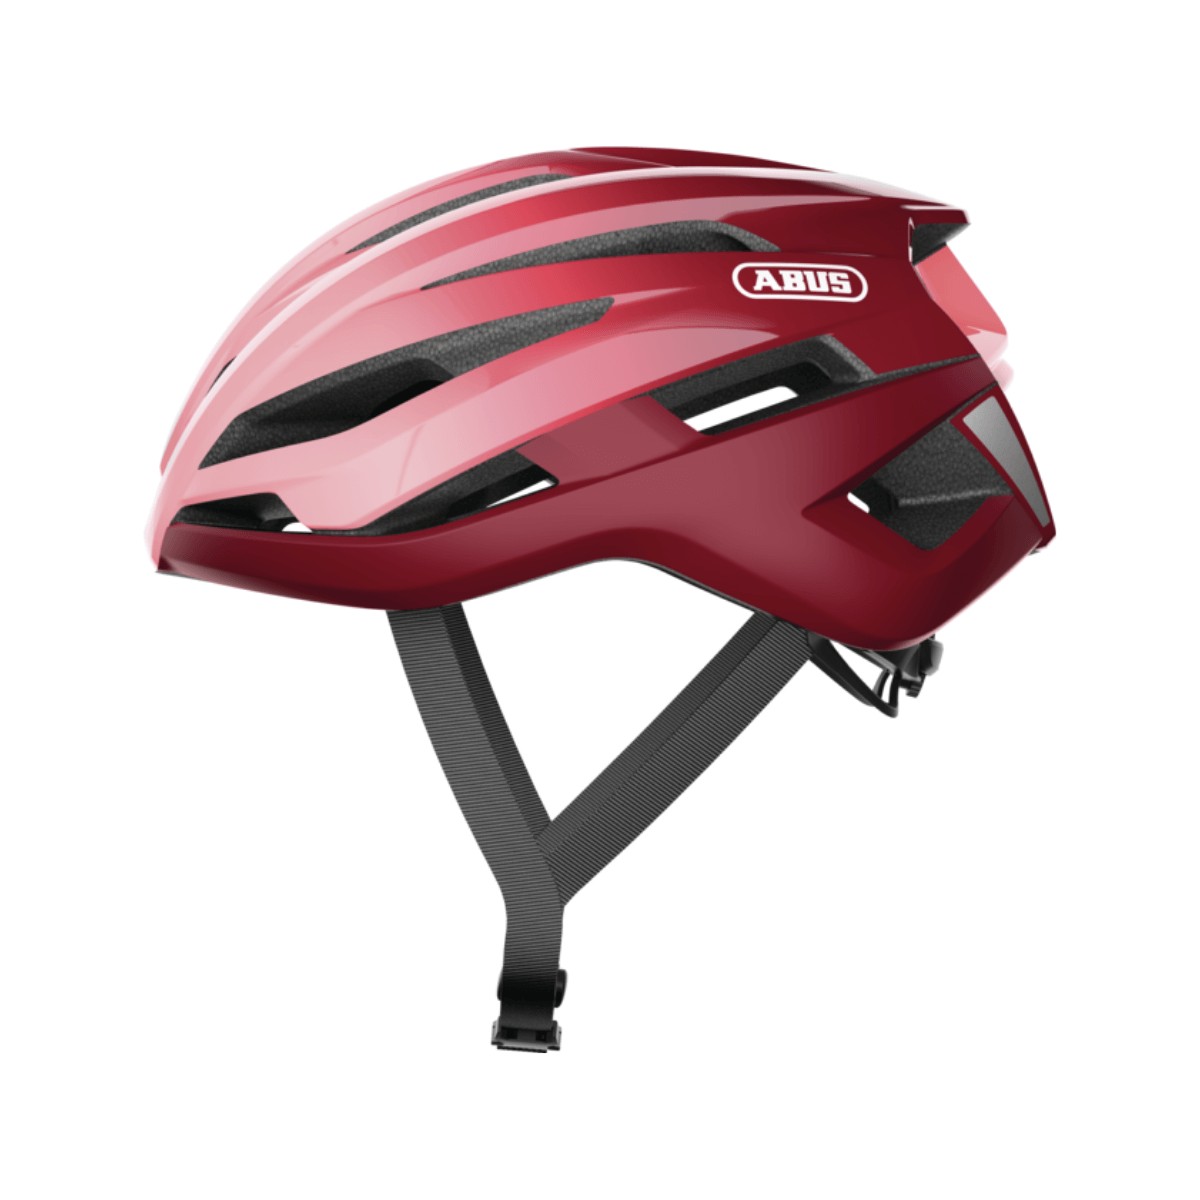 Abus Fahrradhelm Stormchaser Road Helm 87209p Bordeaux Red